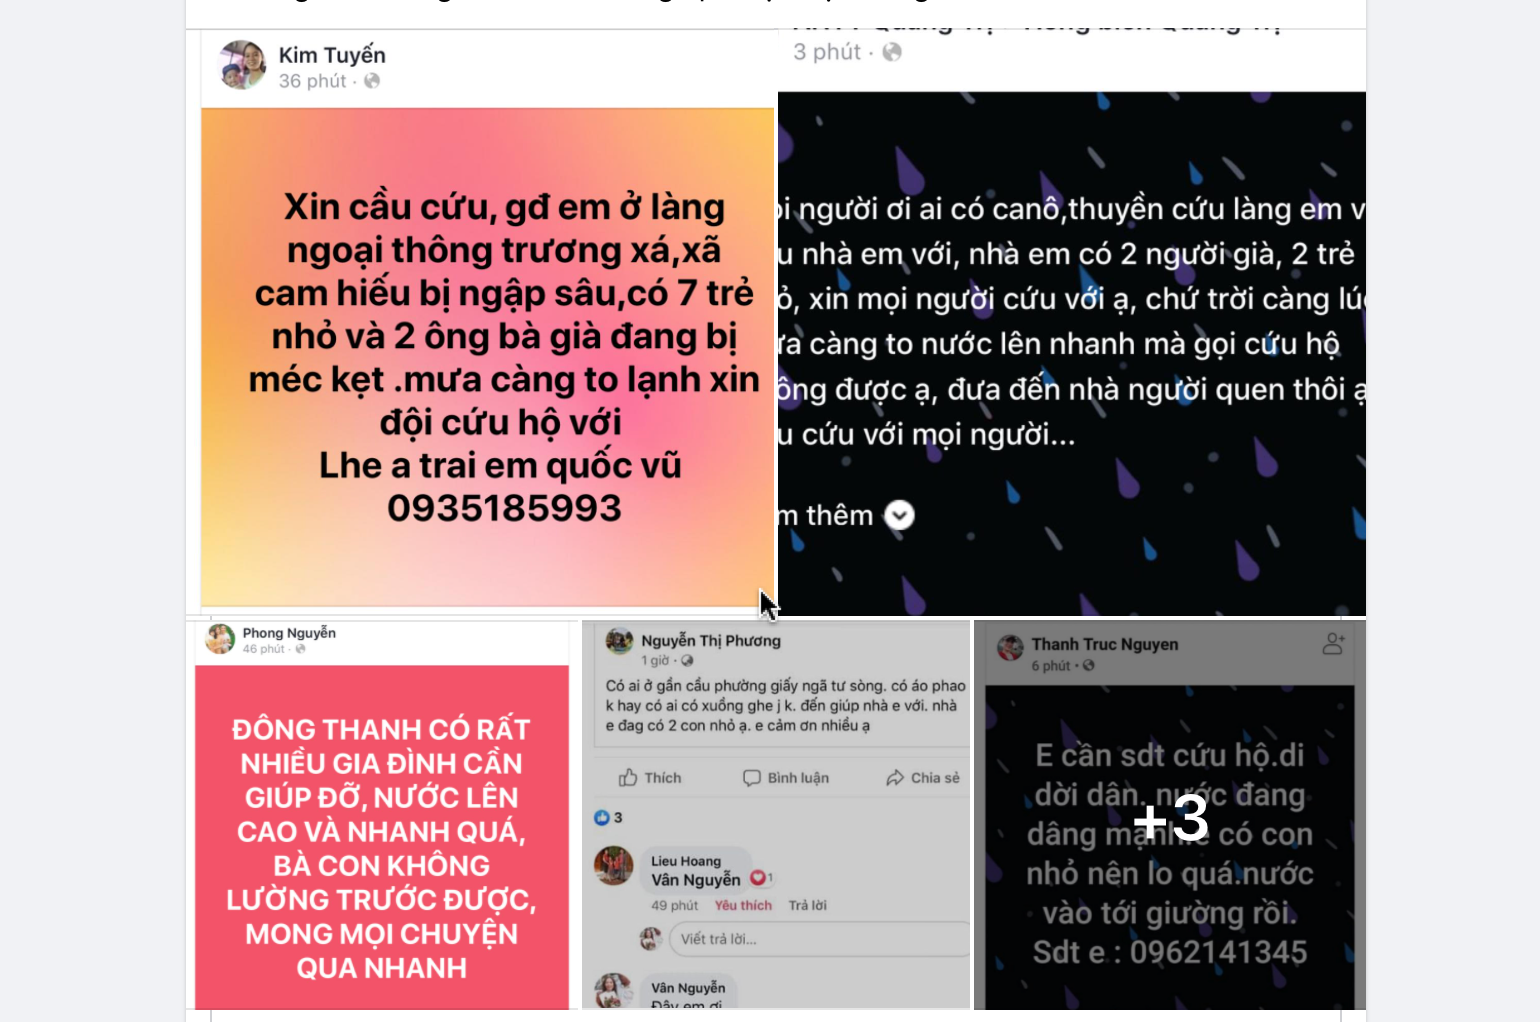 Screenshots of Facebook statuses posted by residents in flood-hit areas in Quang Tri Province, Vietnam, October 17, 2020